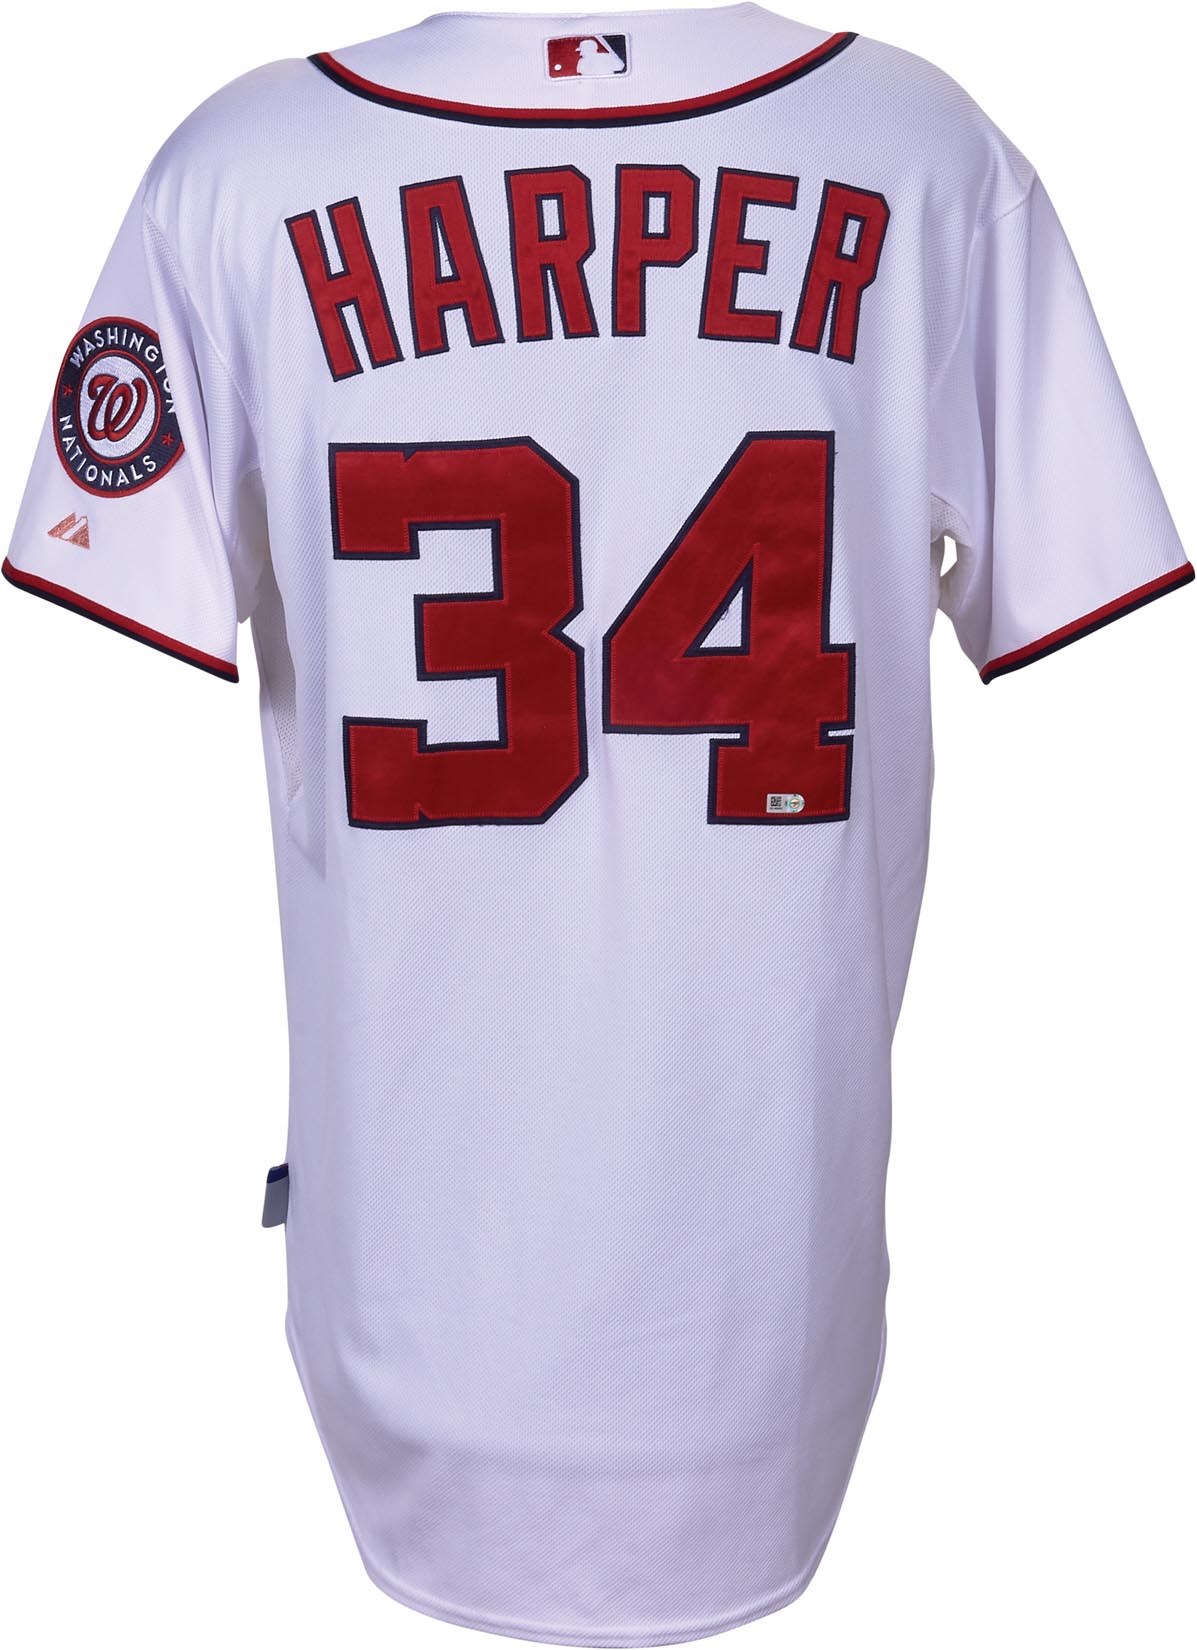 - 2014 Bryce Harper Game Worn "Walk-Off Home Run" Jersey (MLB Auth. & Photo-Matched to Five Games)